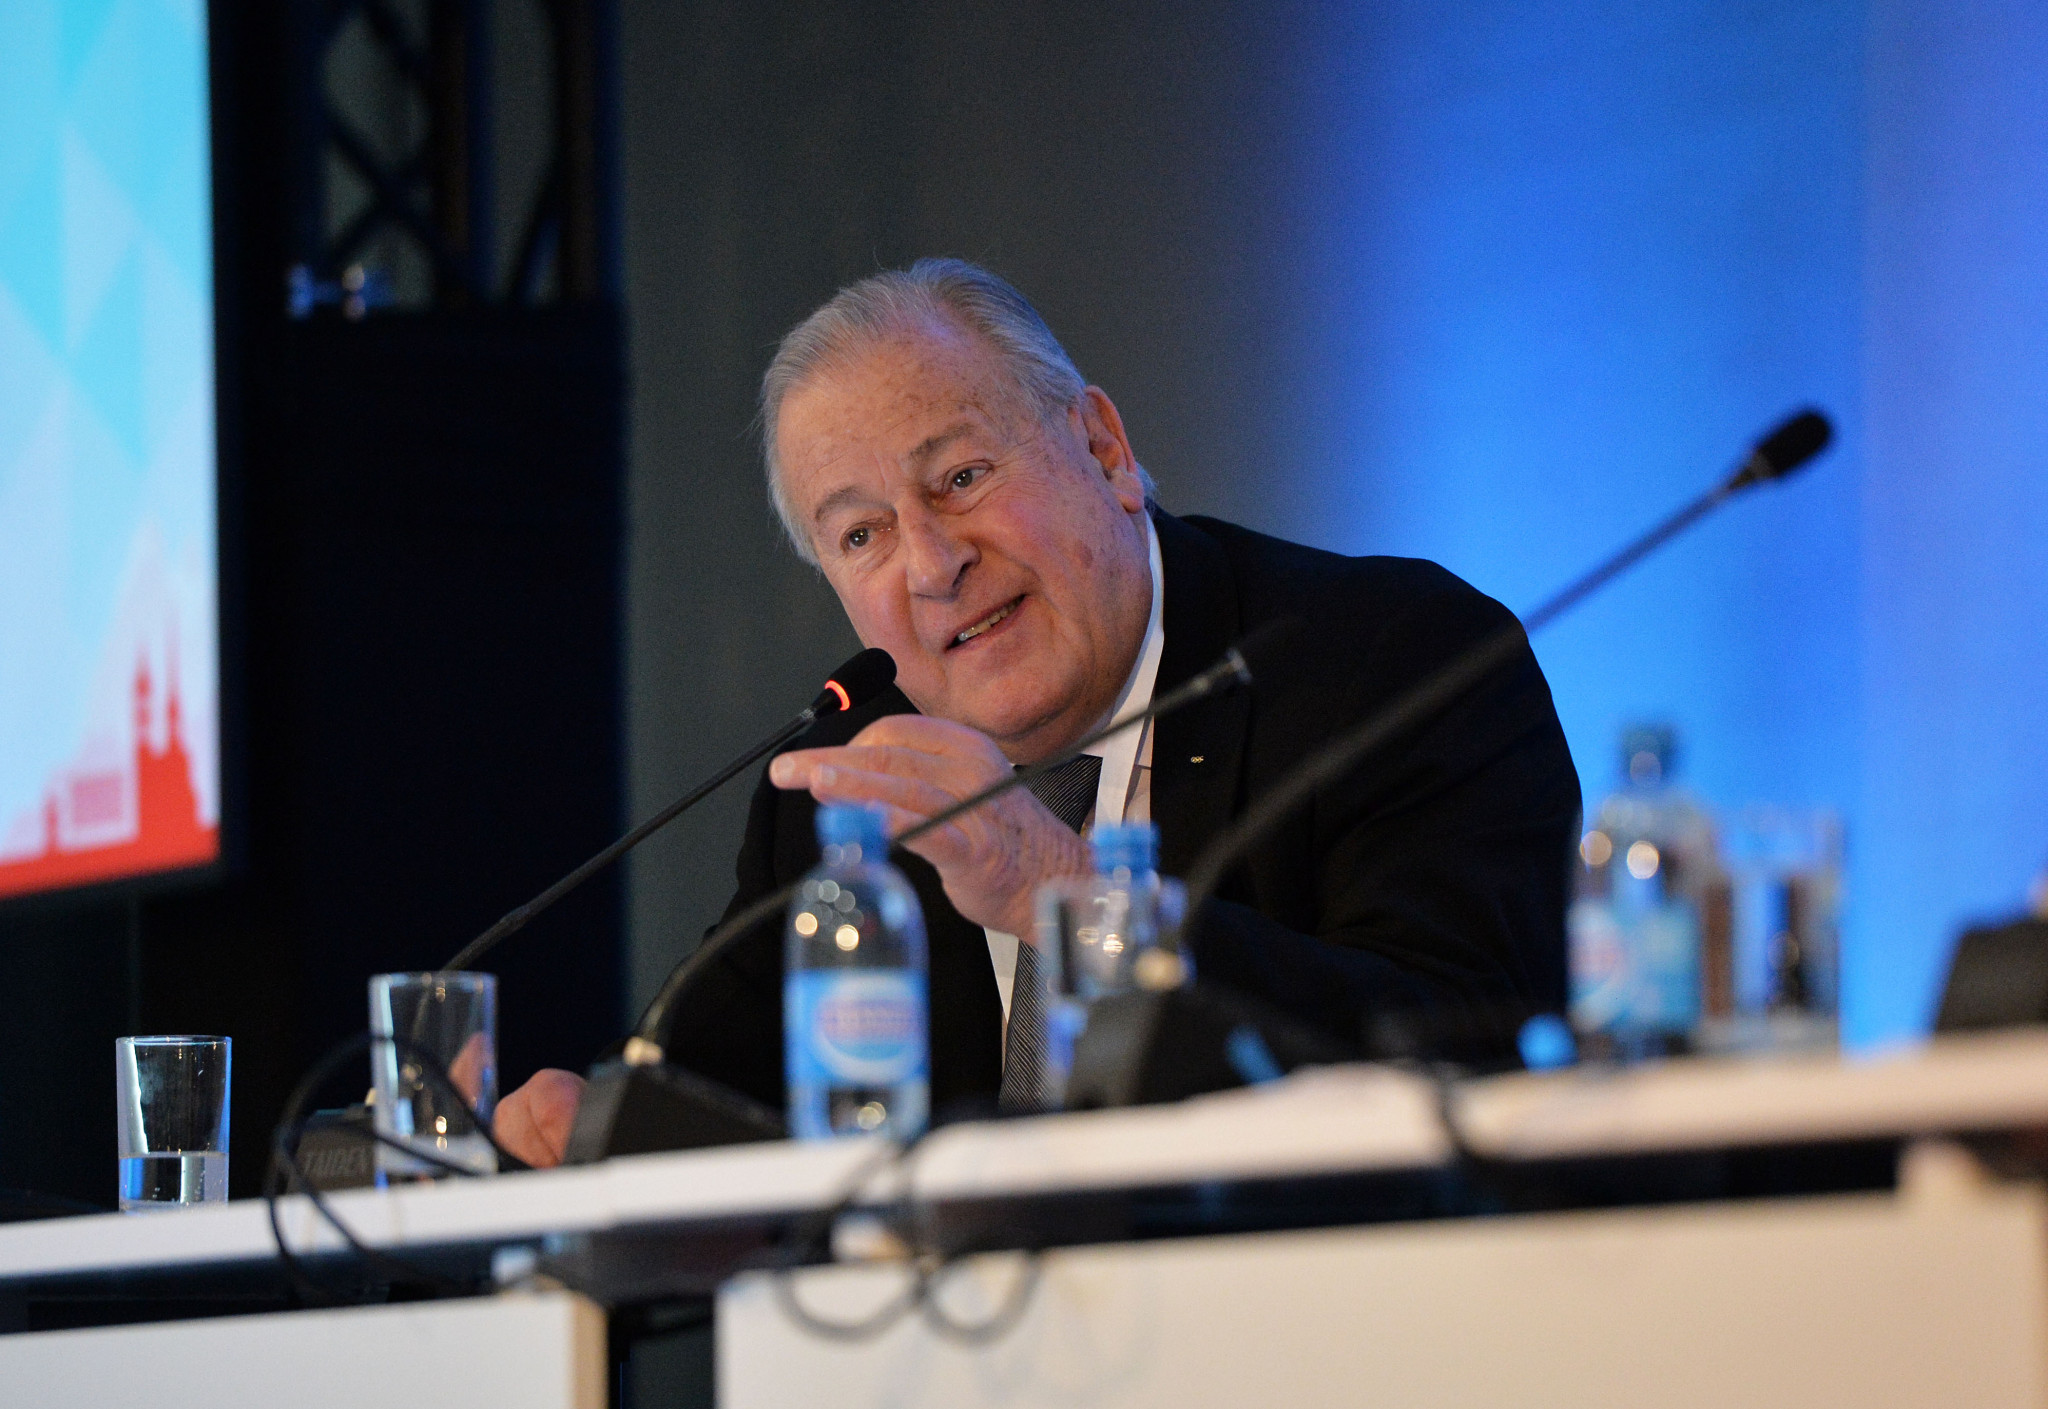 Former IOC director general François Carrard is among the members elected to the Gymnastics Ethics Foundation Council ©Getty Images